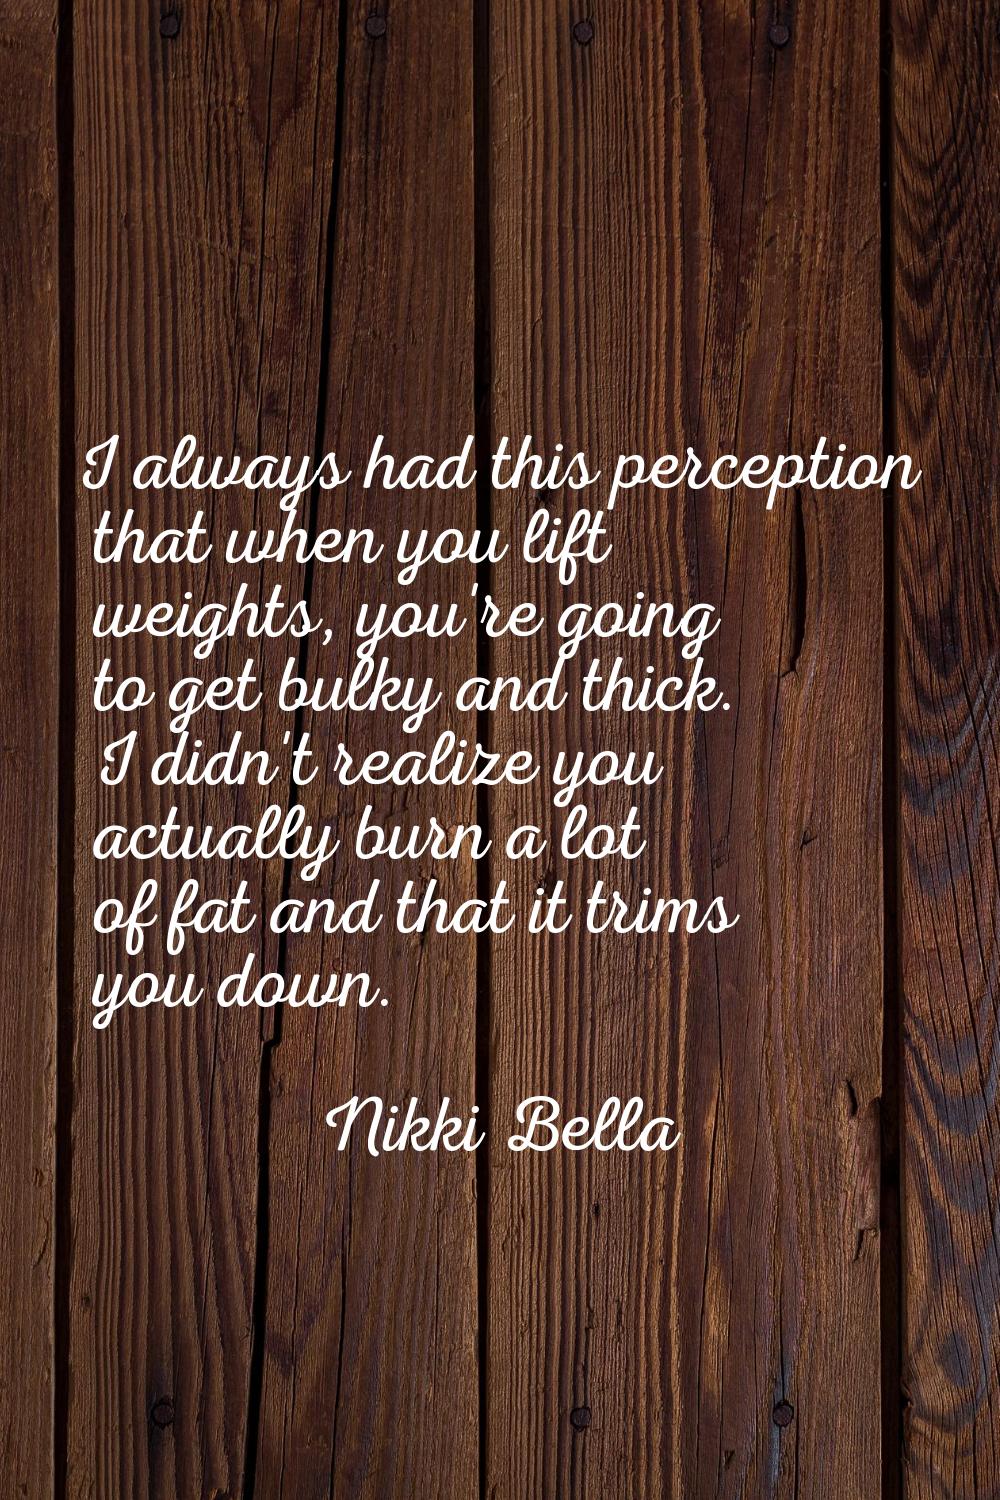 I always had this perception that when you lift weights, you're going to get bulky and thick. I did